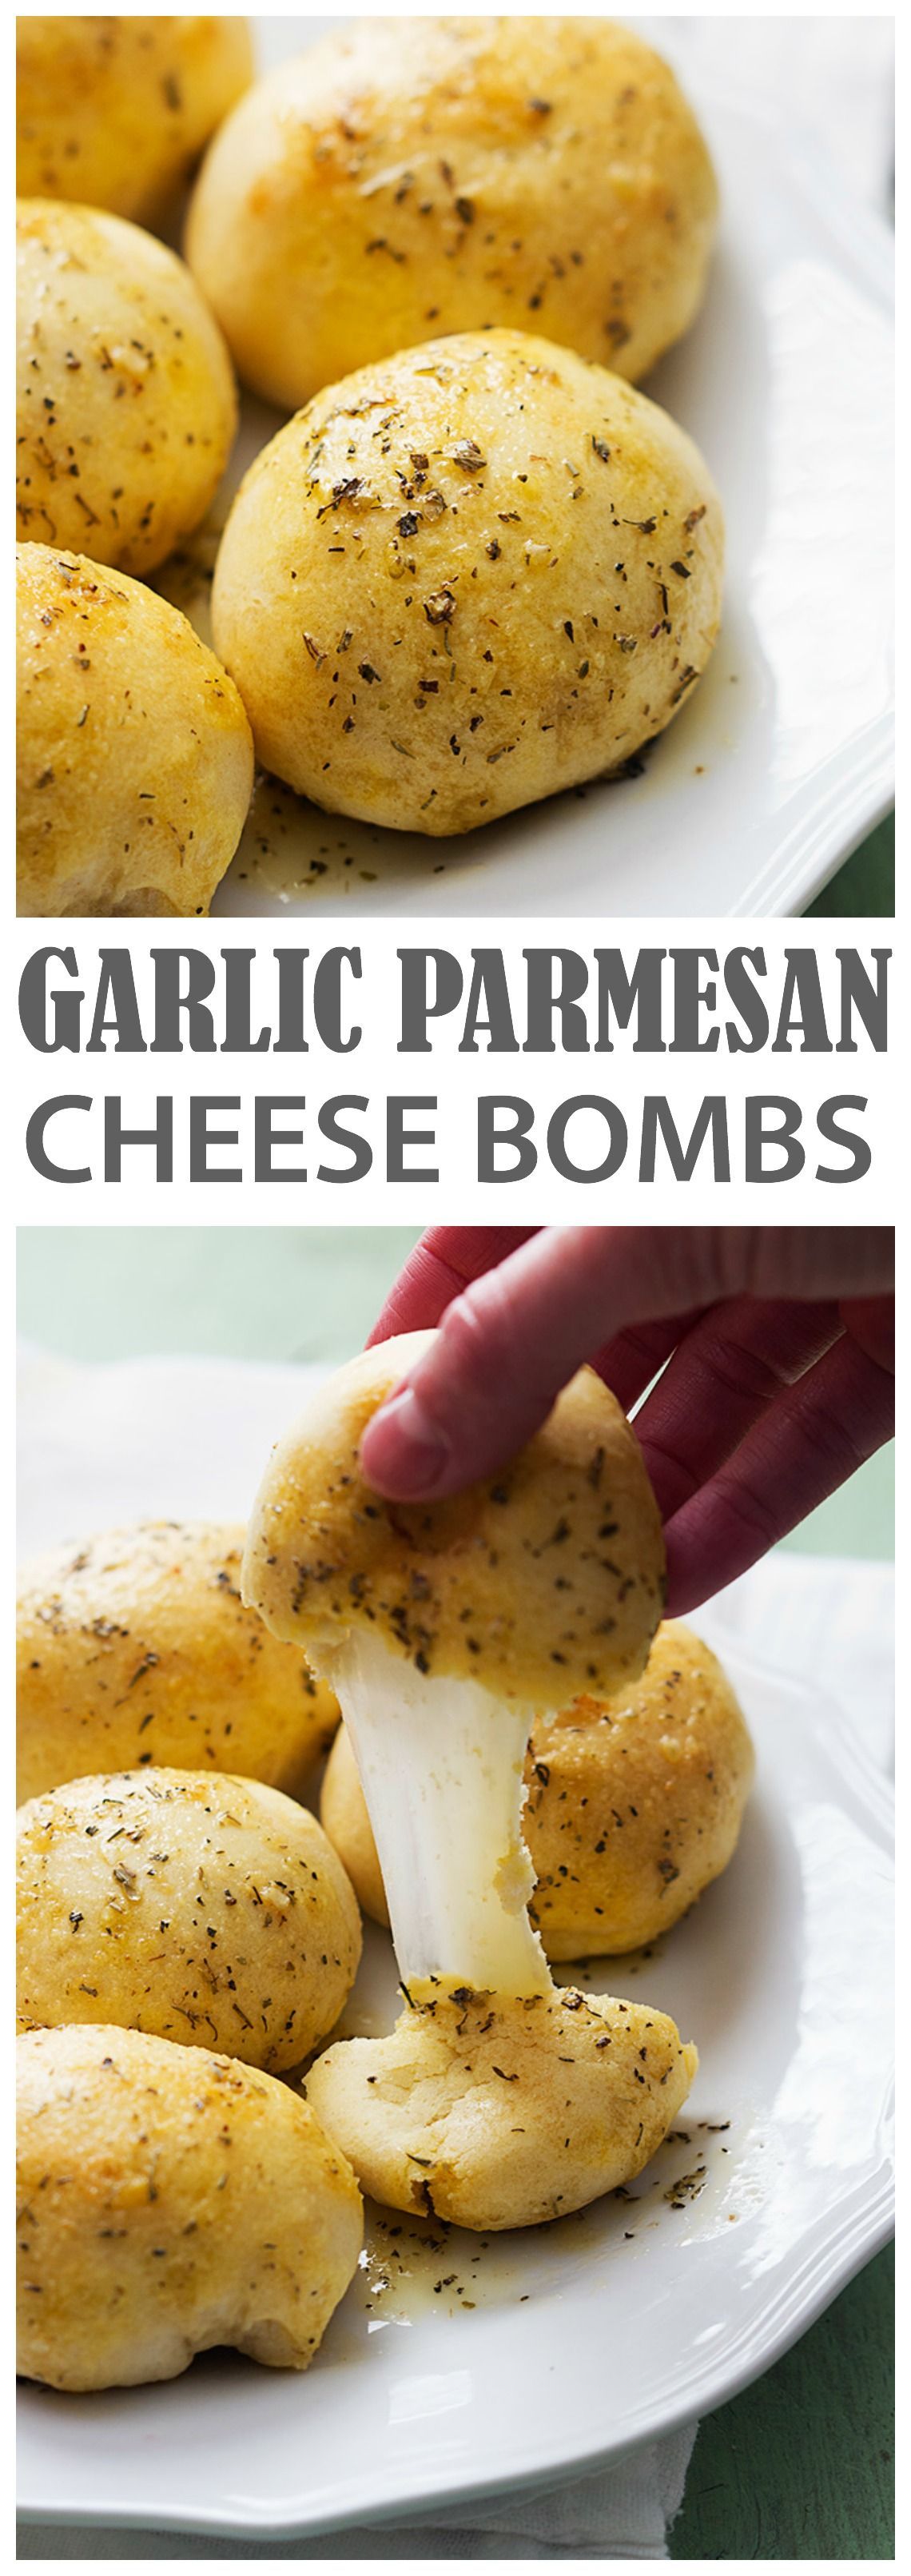 These Garlic Parmesan Cheese Bombs are INSANELY good!! Quick and easy and sure to be a huge hit!